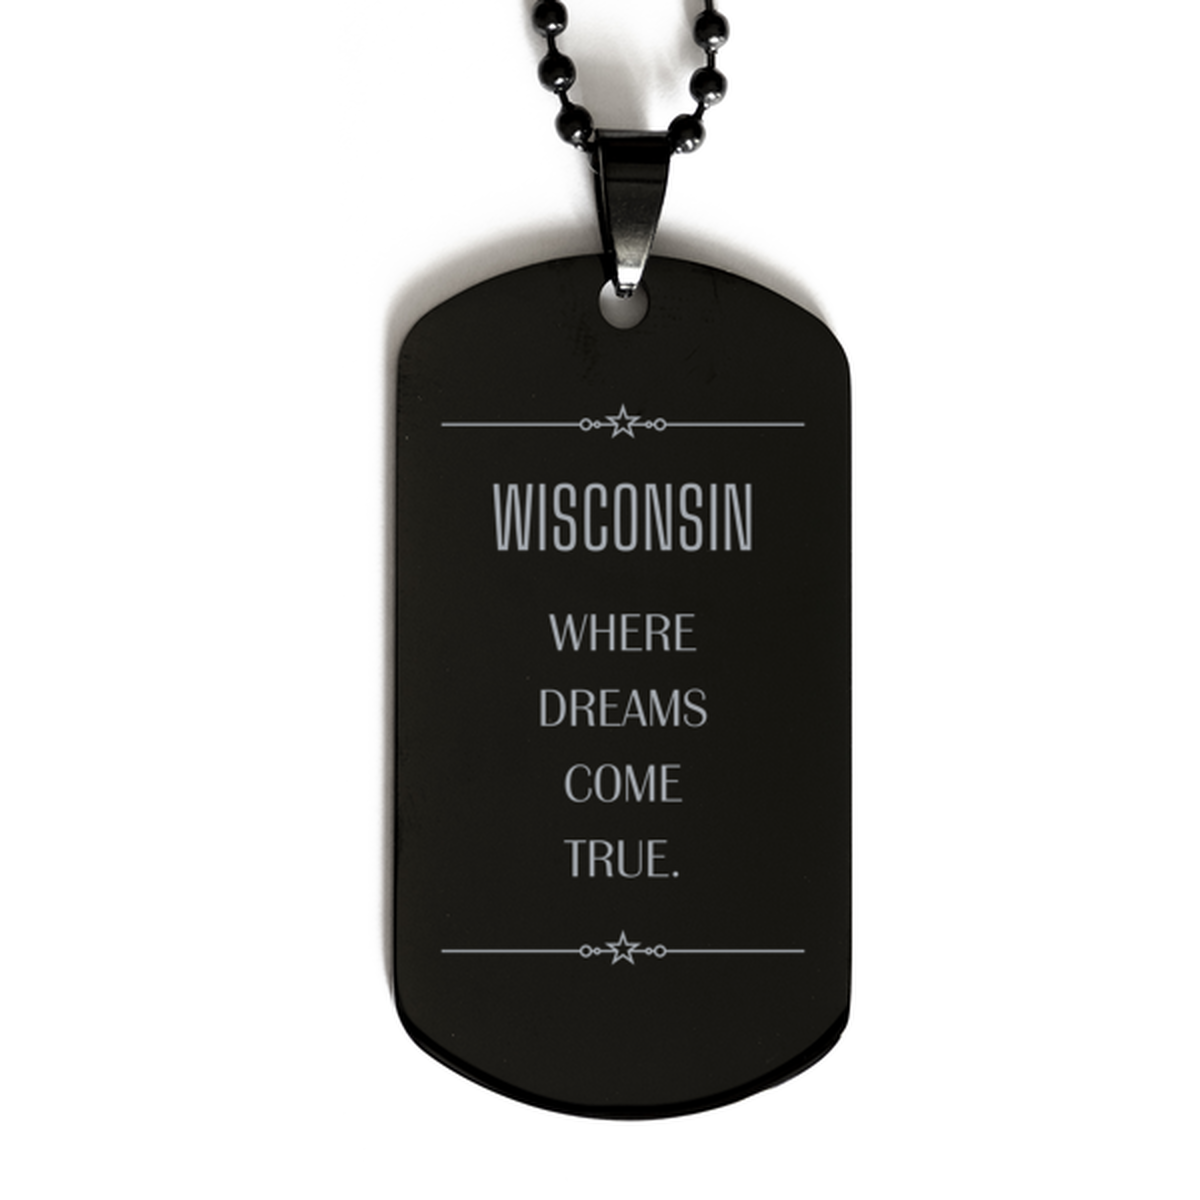 Love Wisconsin State Black Dog Tag, Wisconsin Where dreams come true, Birthday Inspirational Gifts For Wisconsin Men, Women, Friends